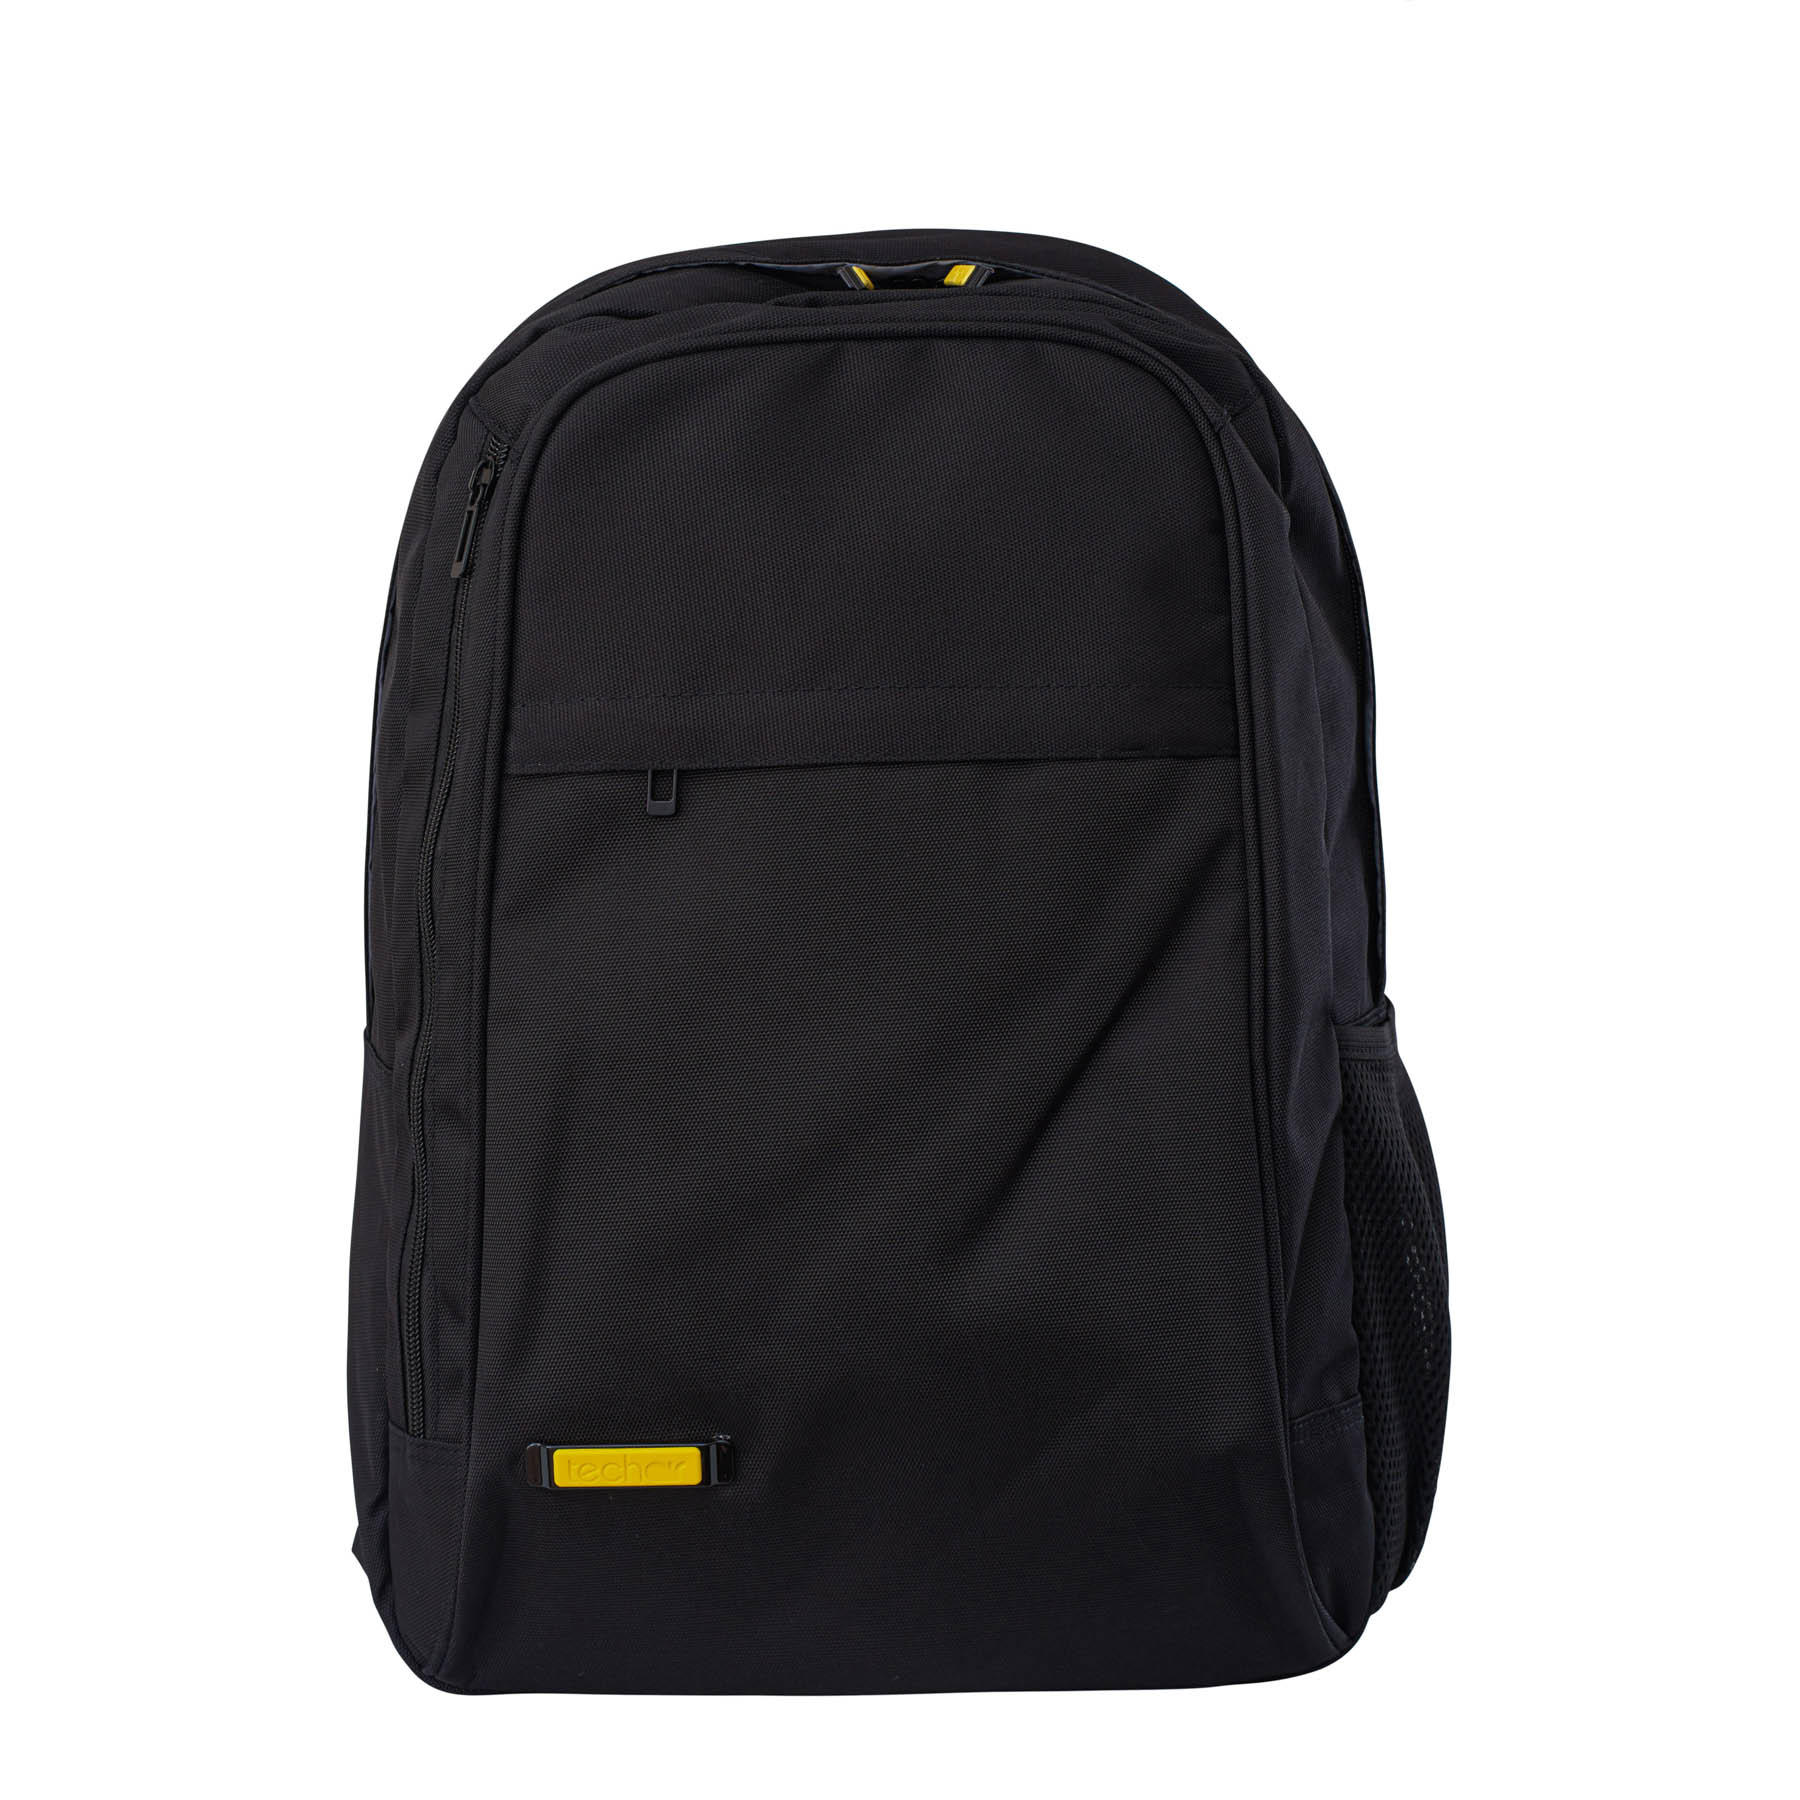 Techair - Notebook Carrying Backpack - 14" - 15.6" - Black TANZ0722 - C2000